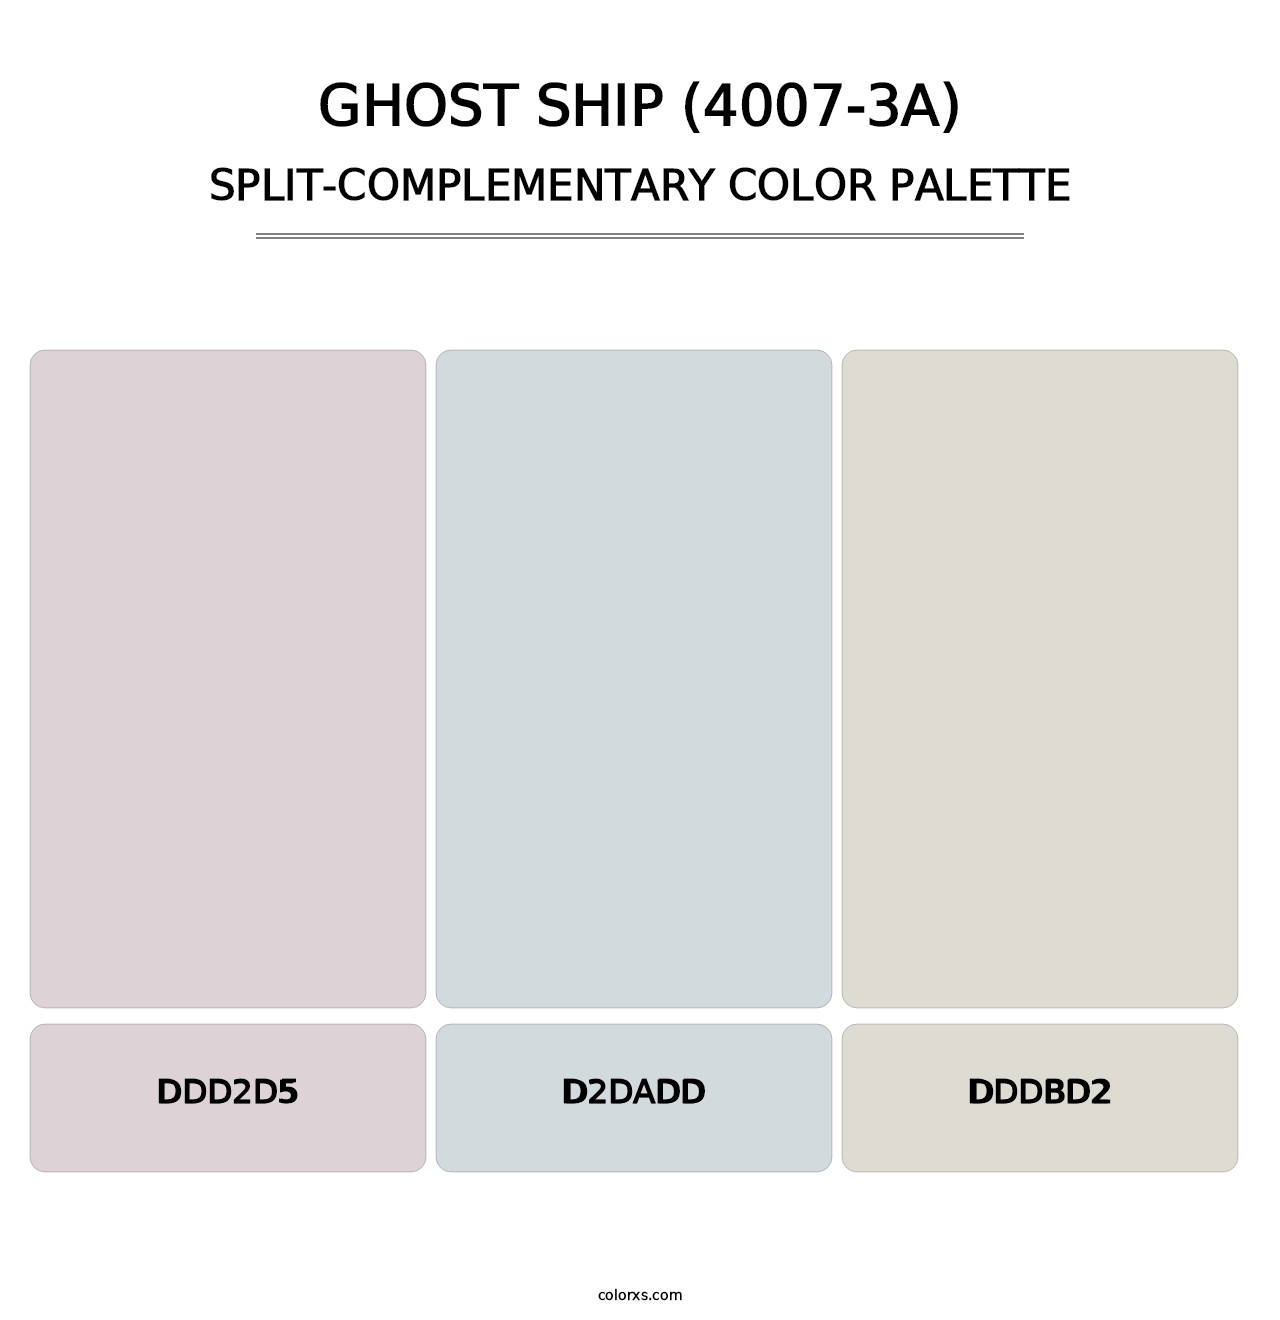 Ghost Ship (4007-3A) - Split-Complementary Color Palette